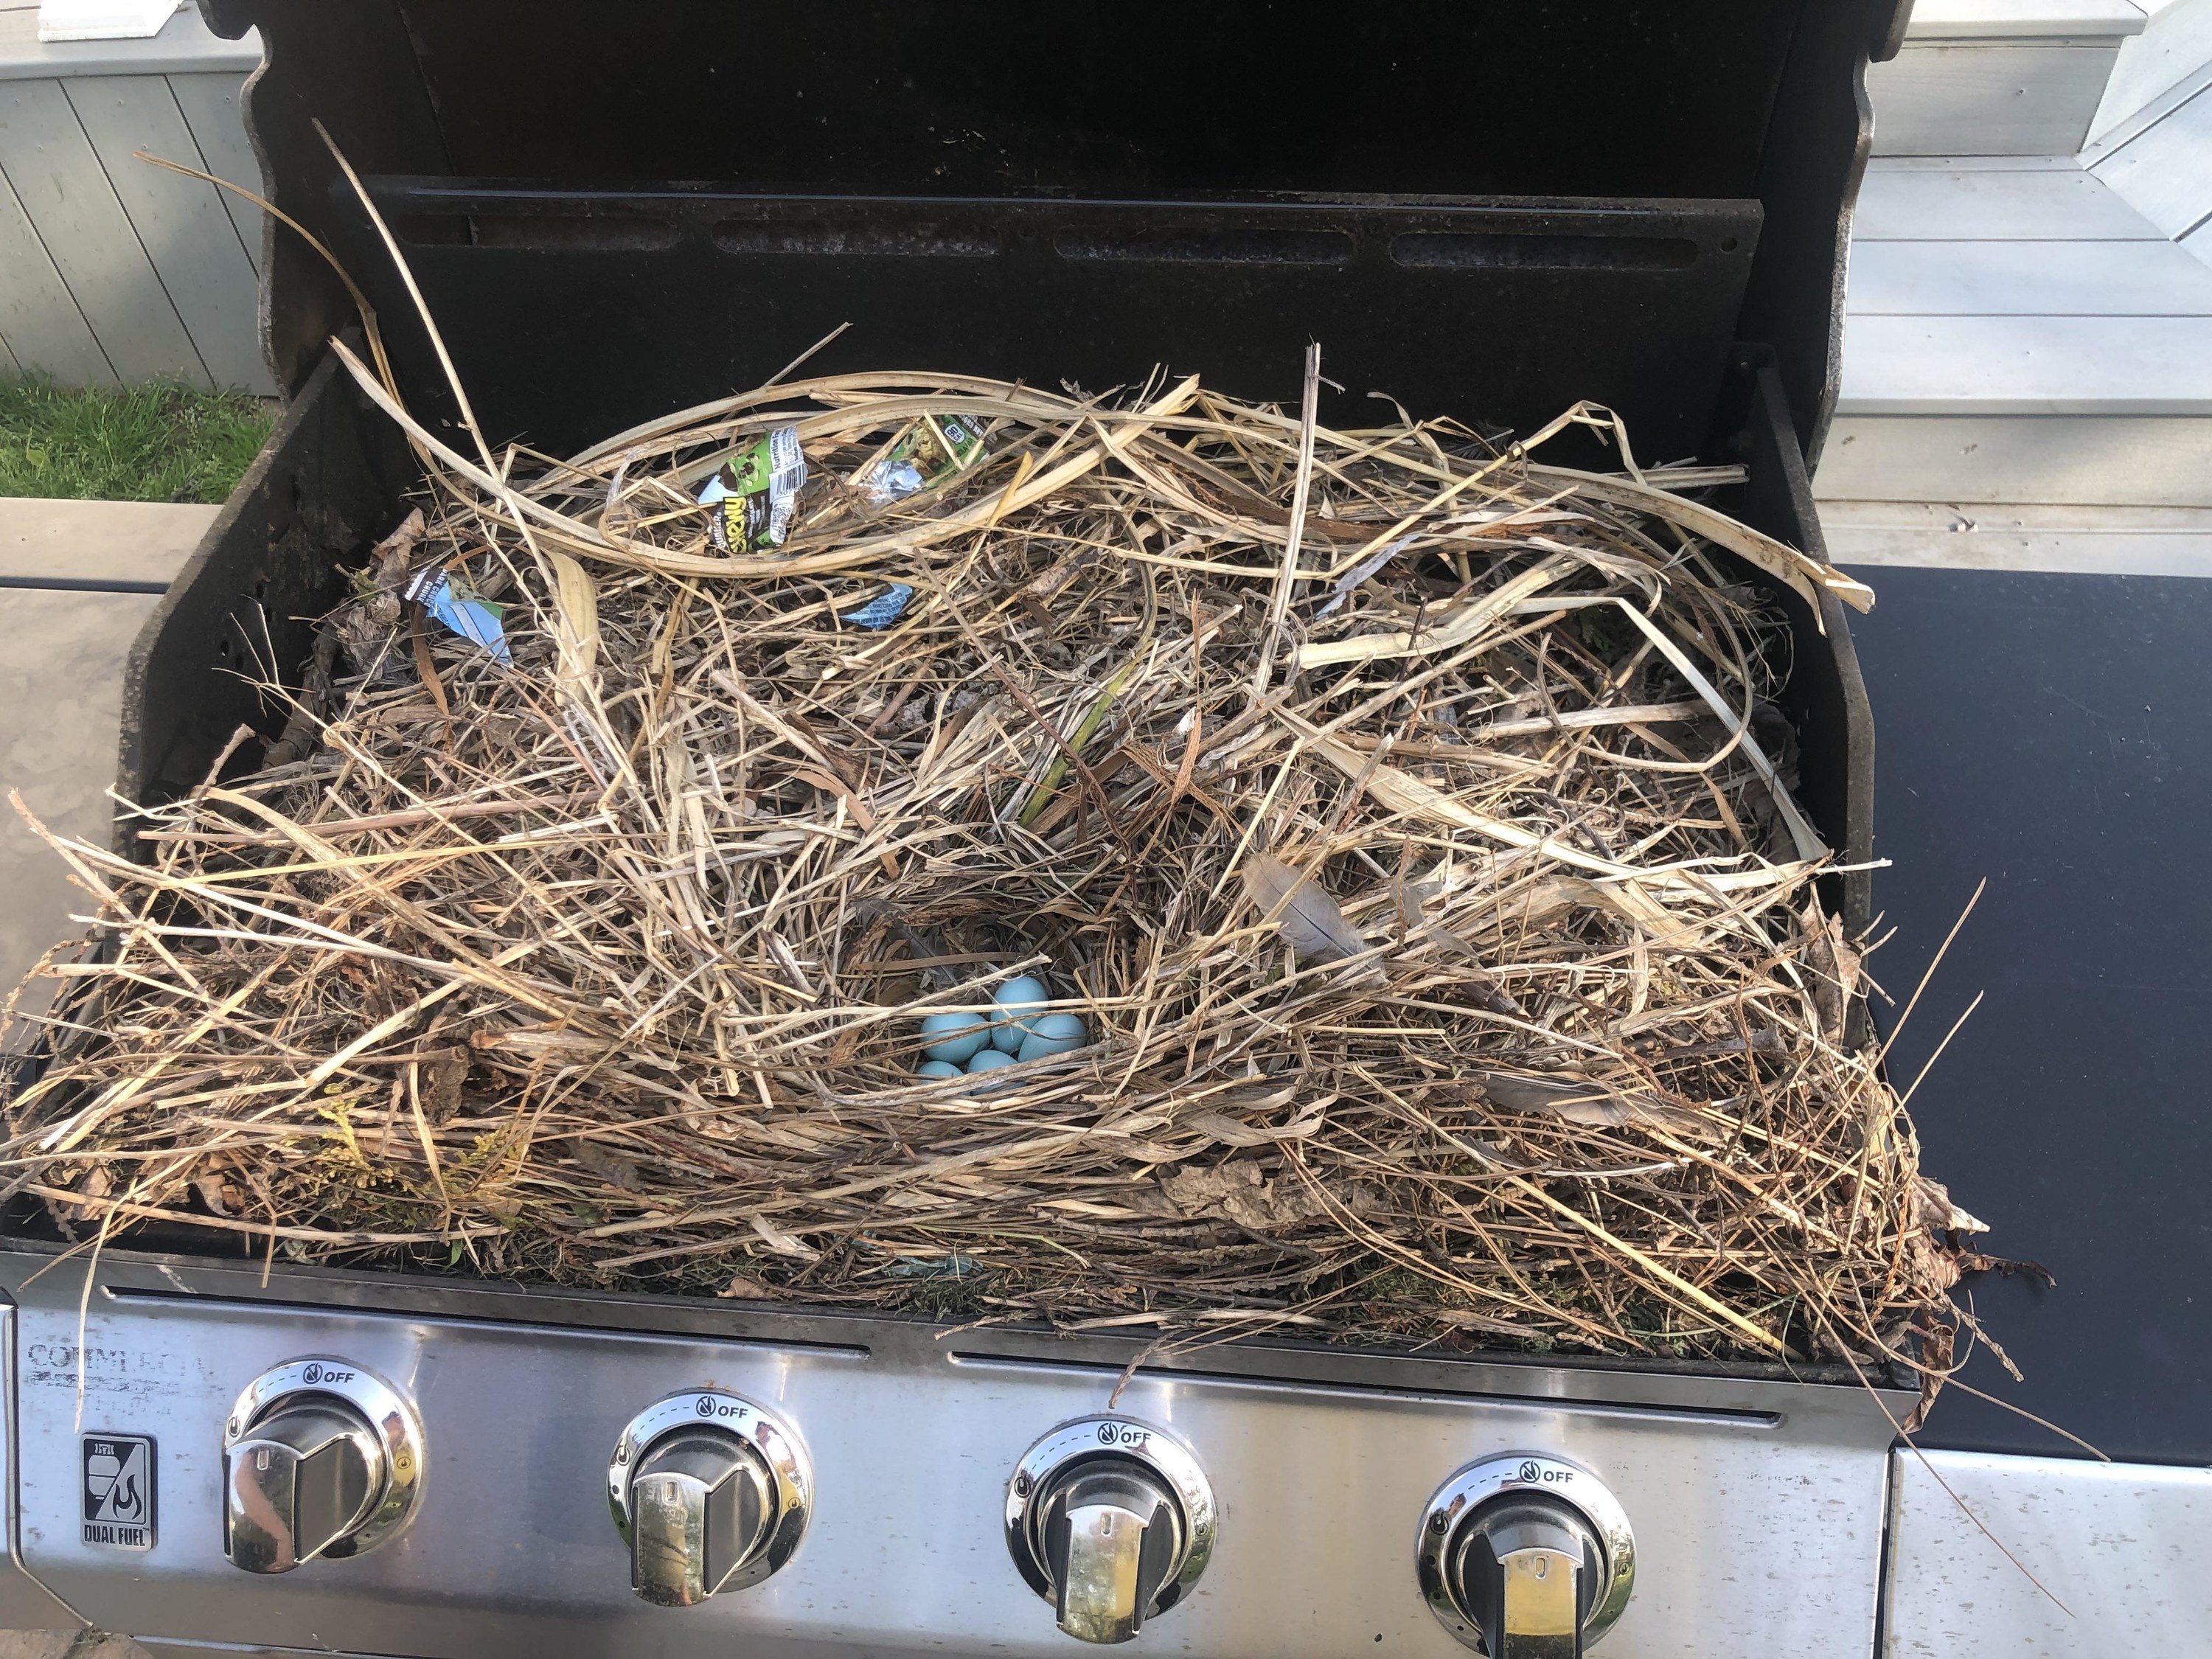 A nest in a BBQ grill